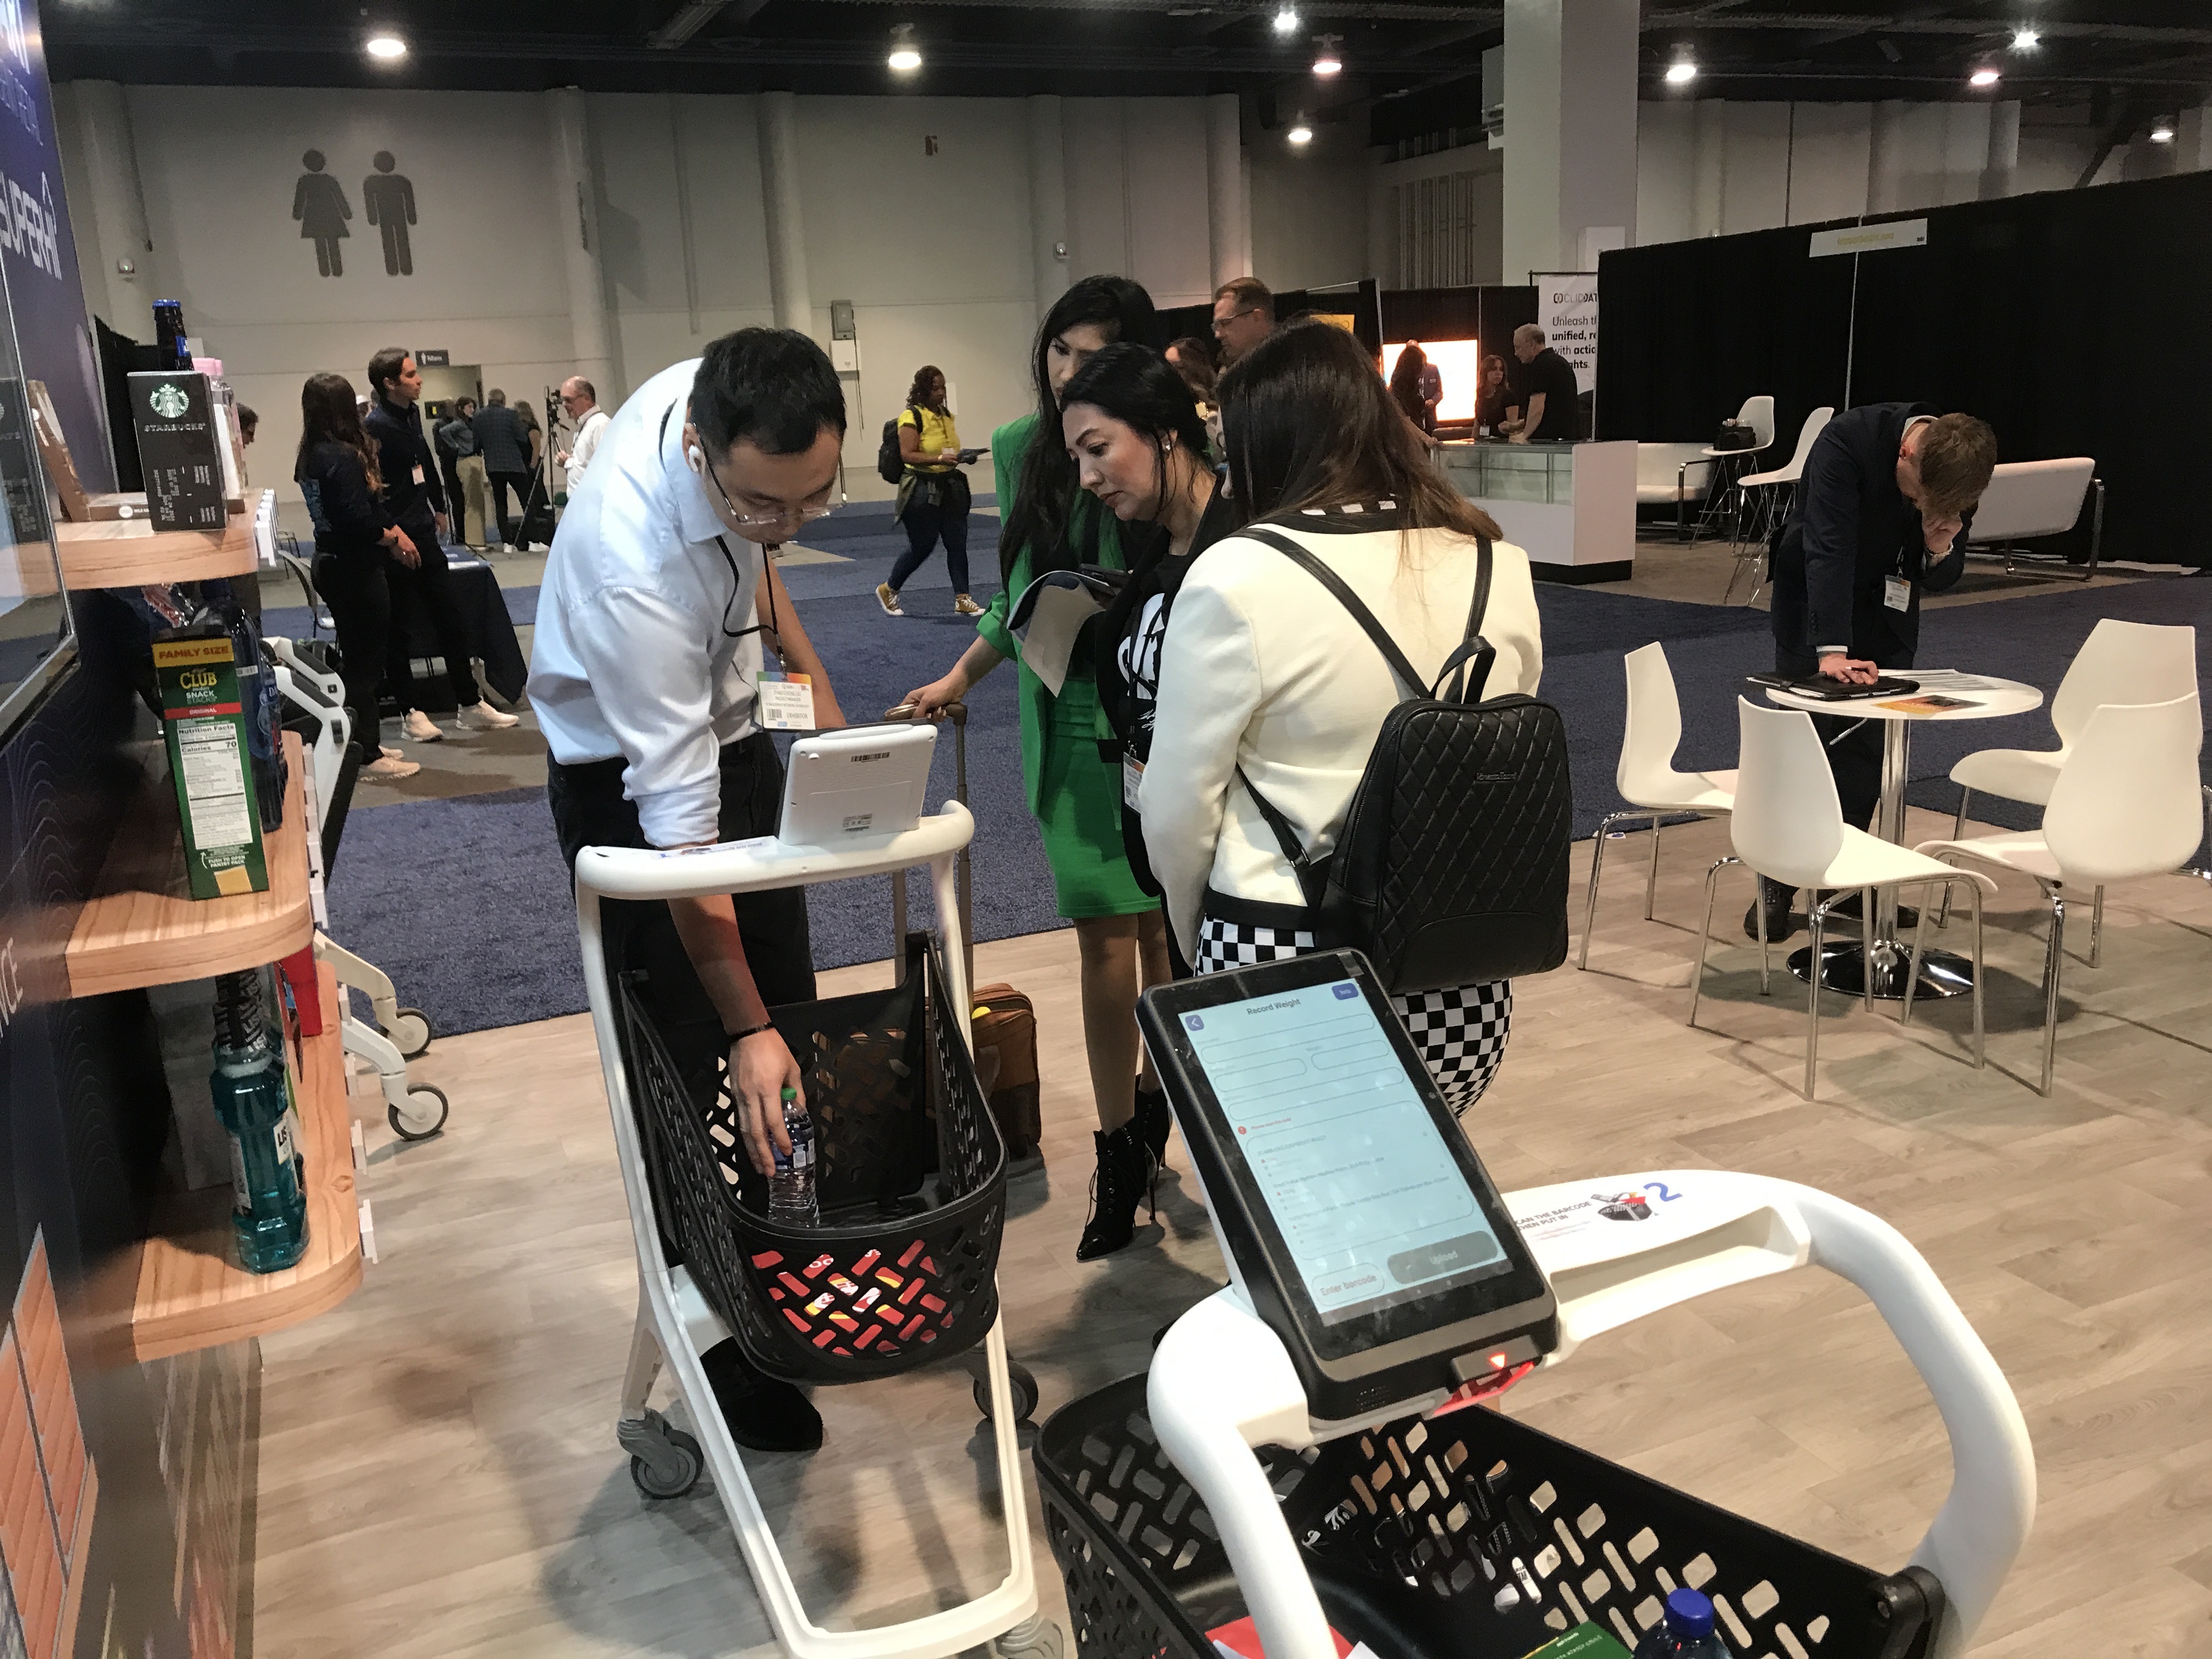 SuperHii smart shopping cart attended the Smart Retail Tech Expo and got much praise